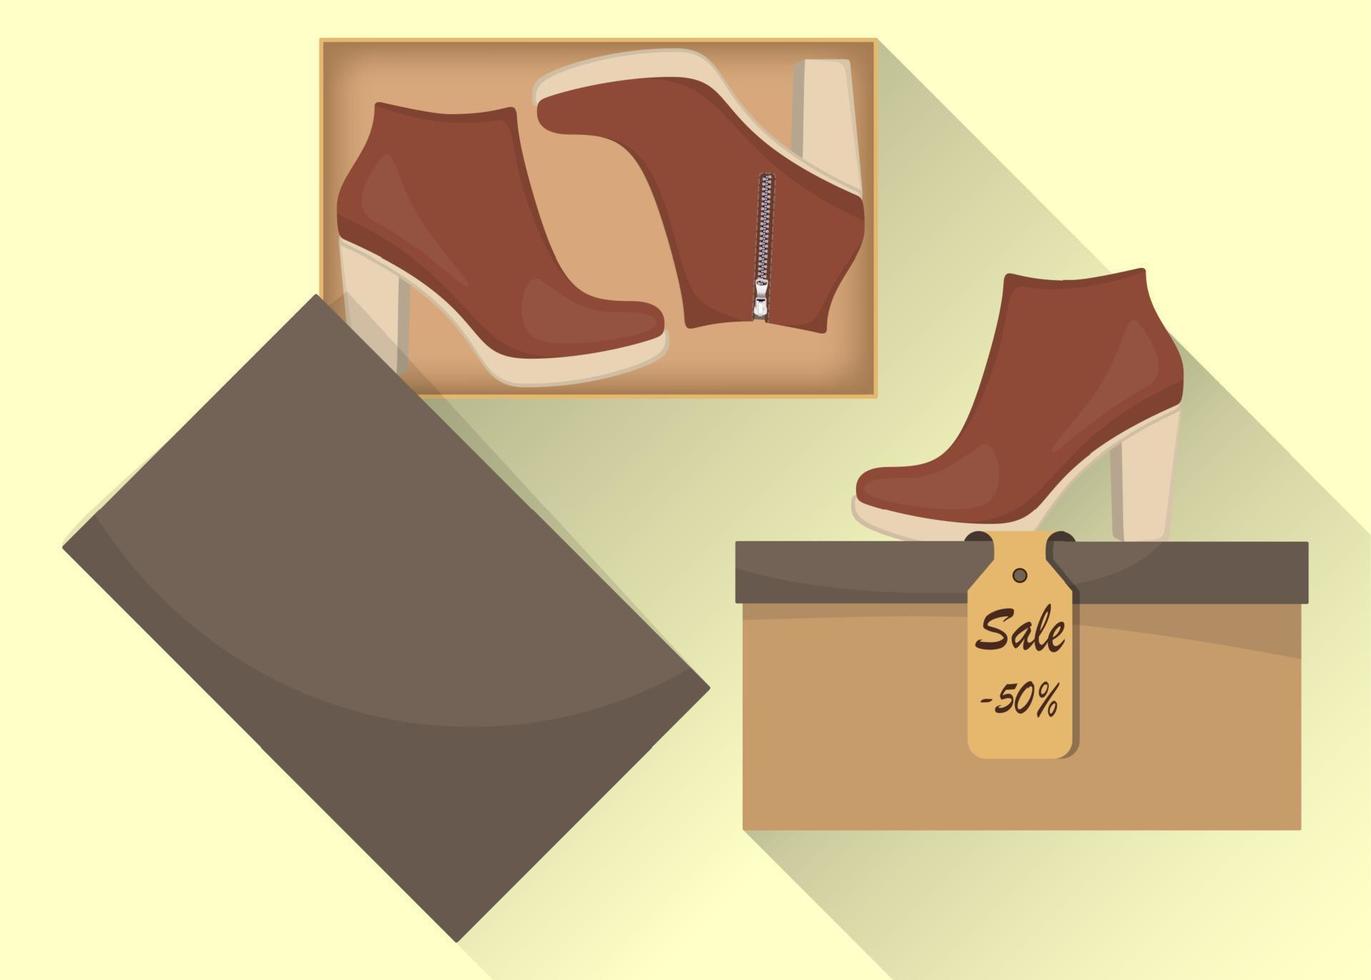 Stylish modern women s high heel boots in box, side view. Sale with a discount of 50 percent. Casual women s shoes. Illustration for a shoe store. Vector flat illustration.